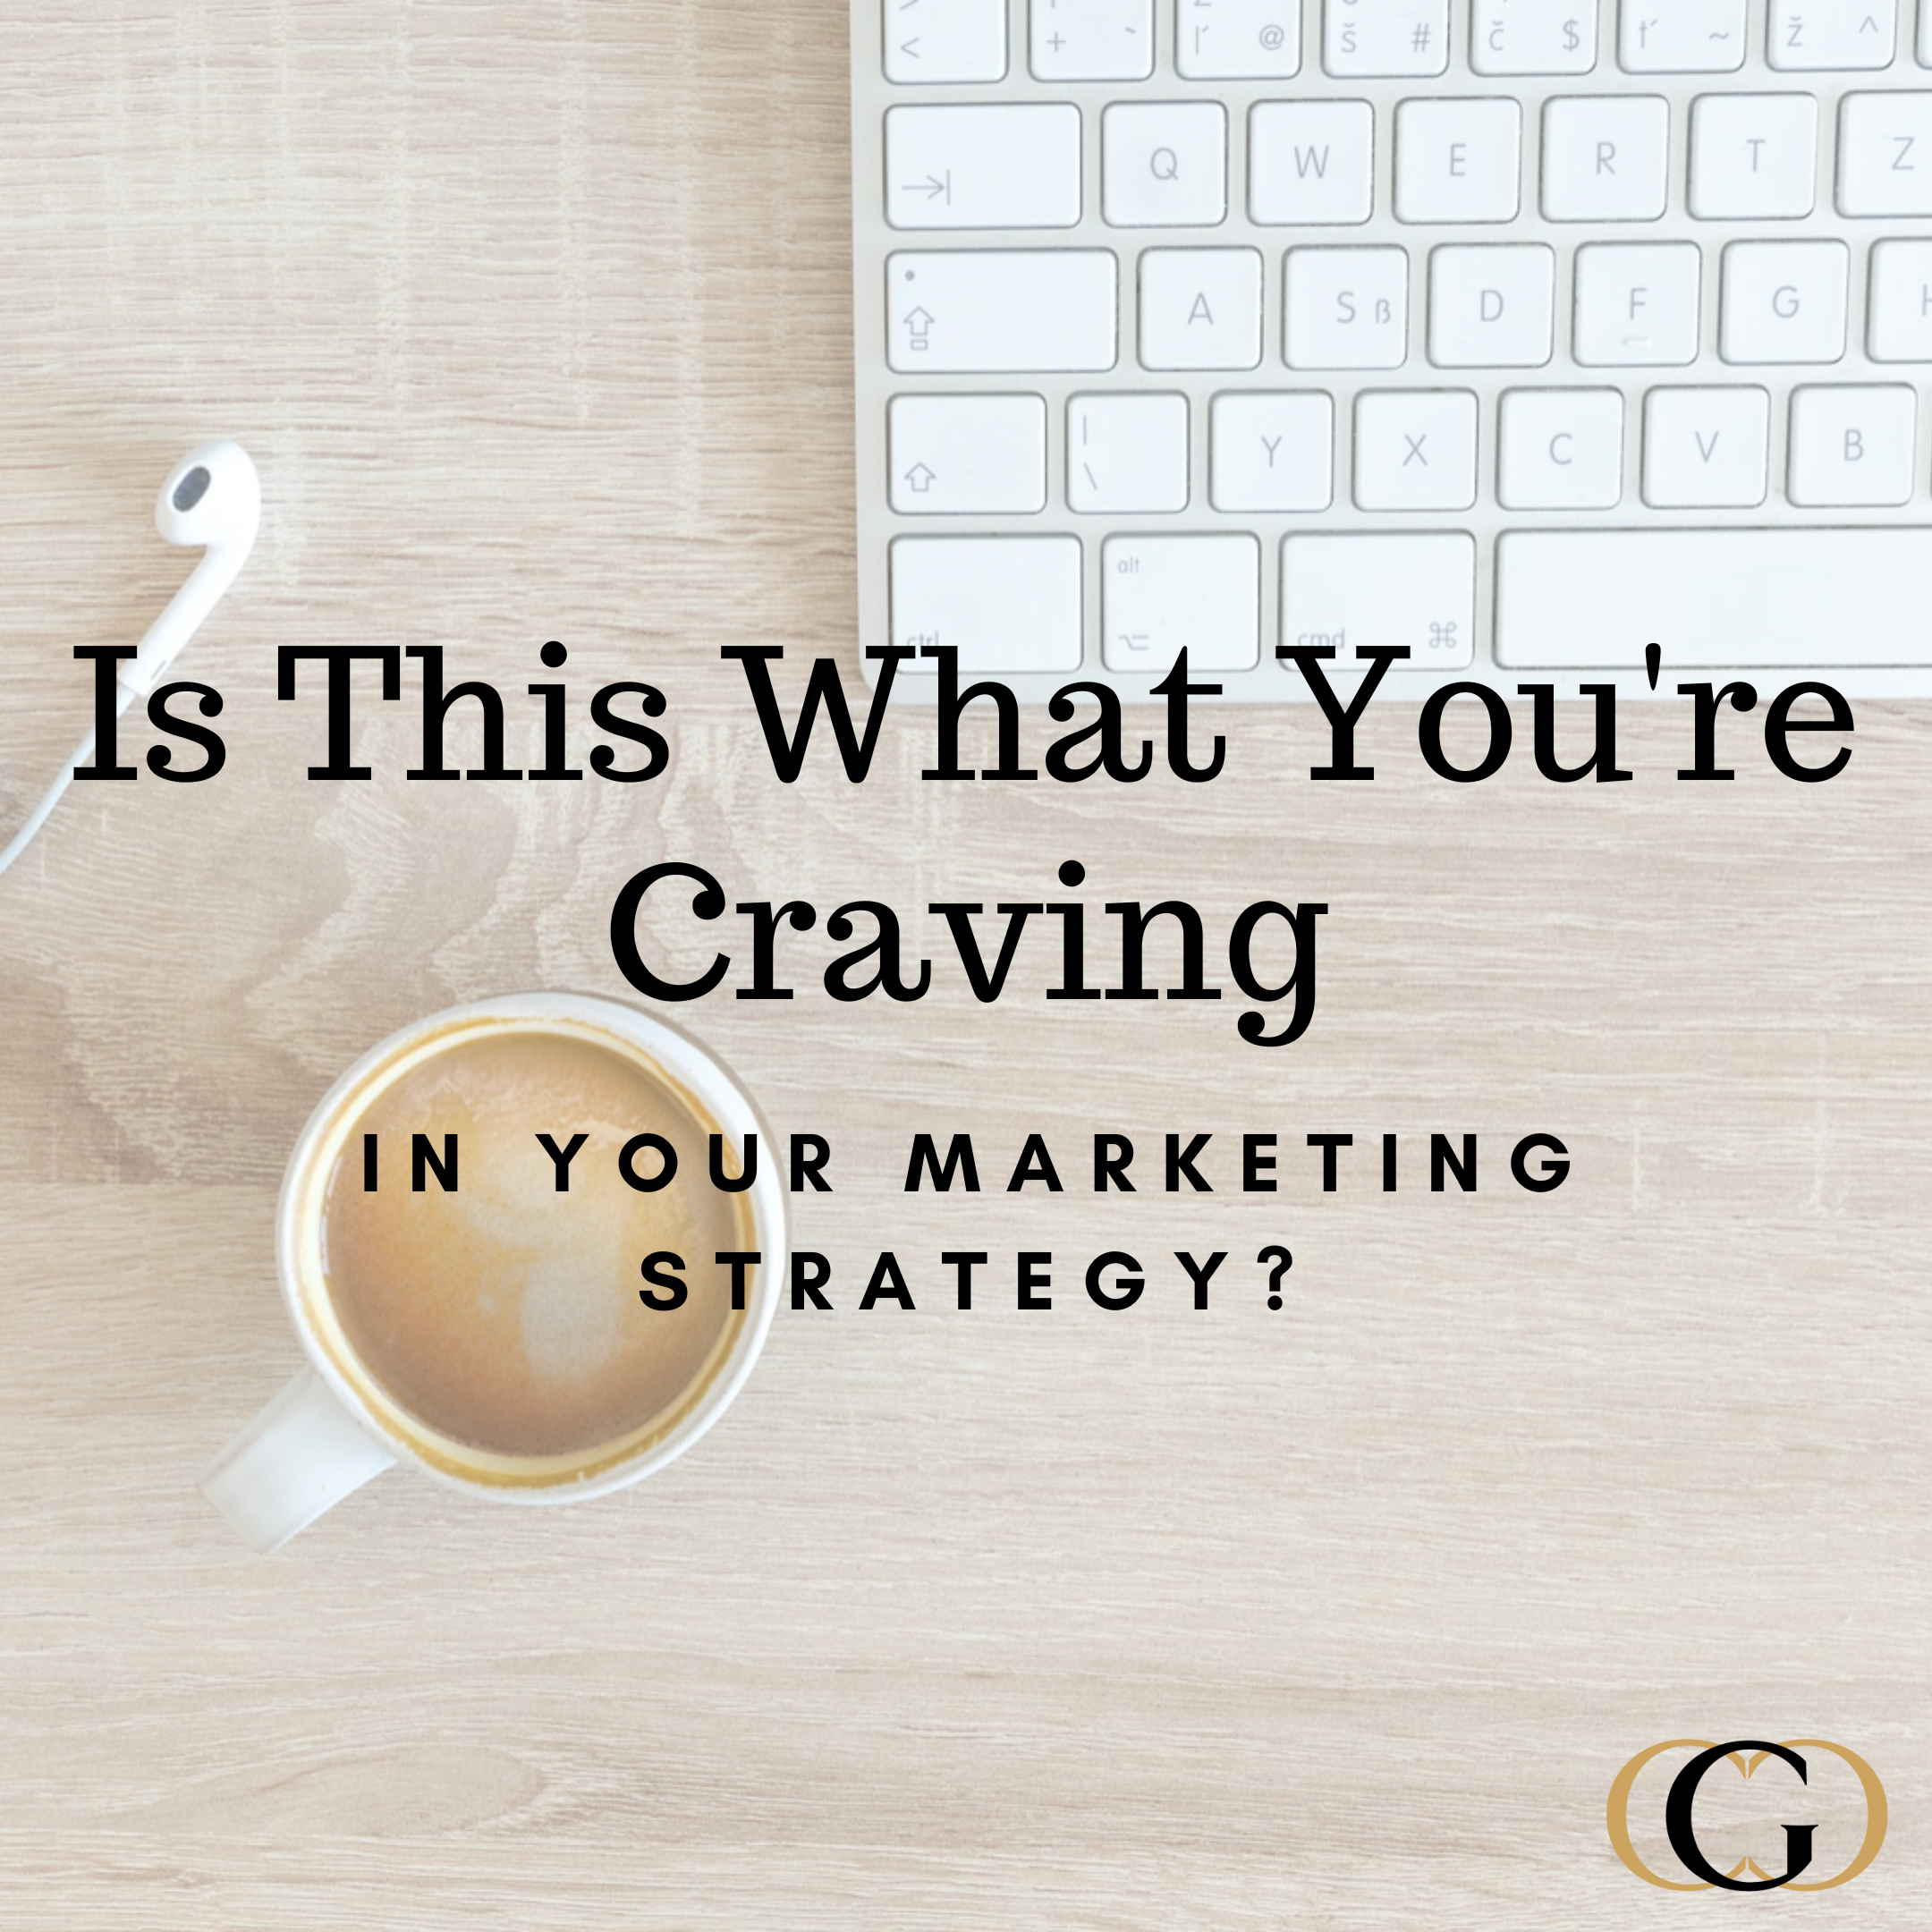 Is this what you're craving in your marketing strategy?